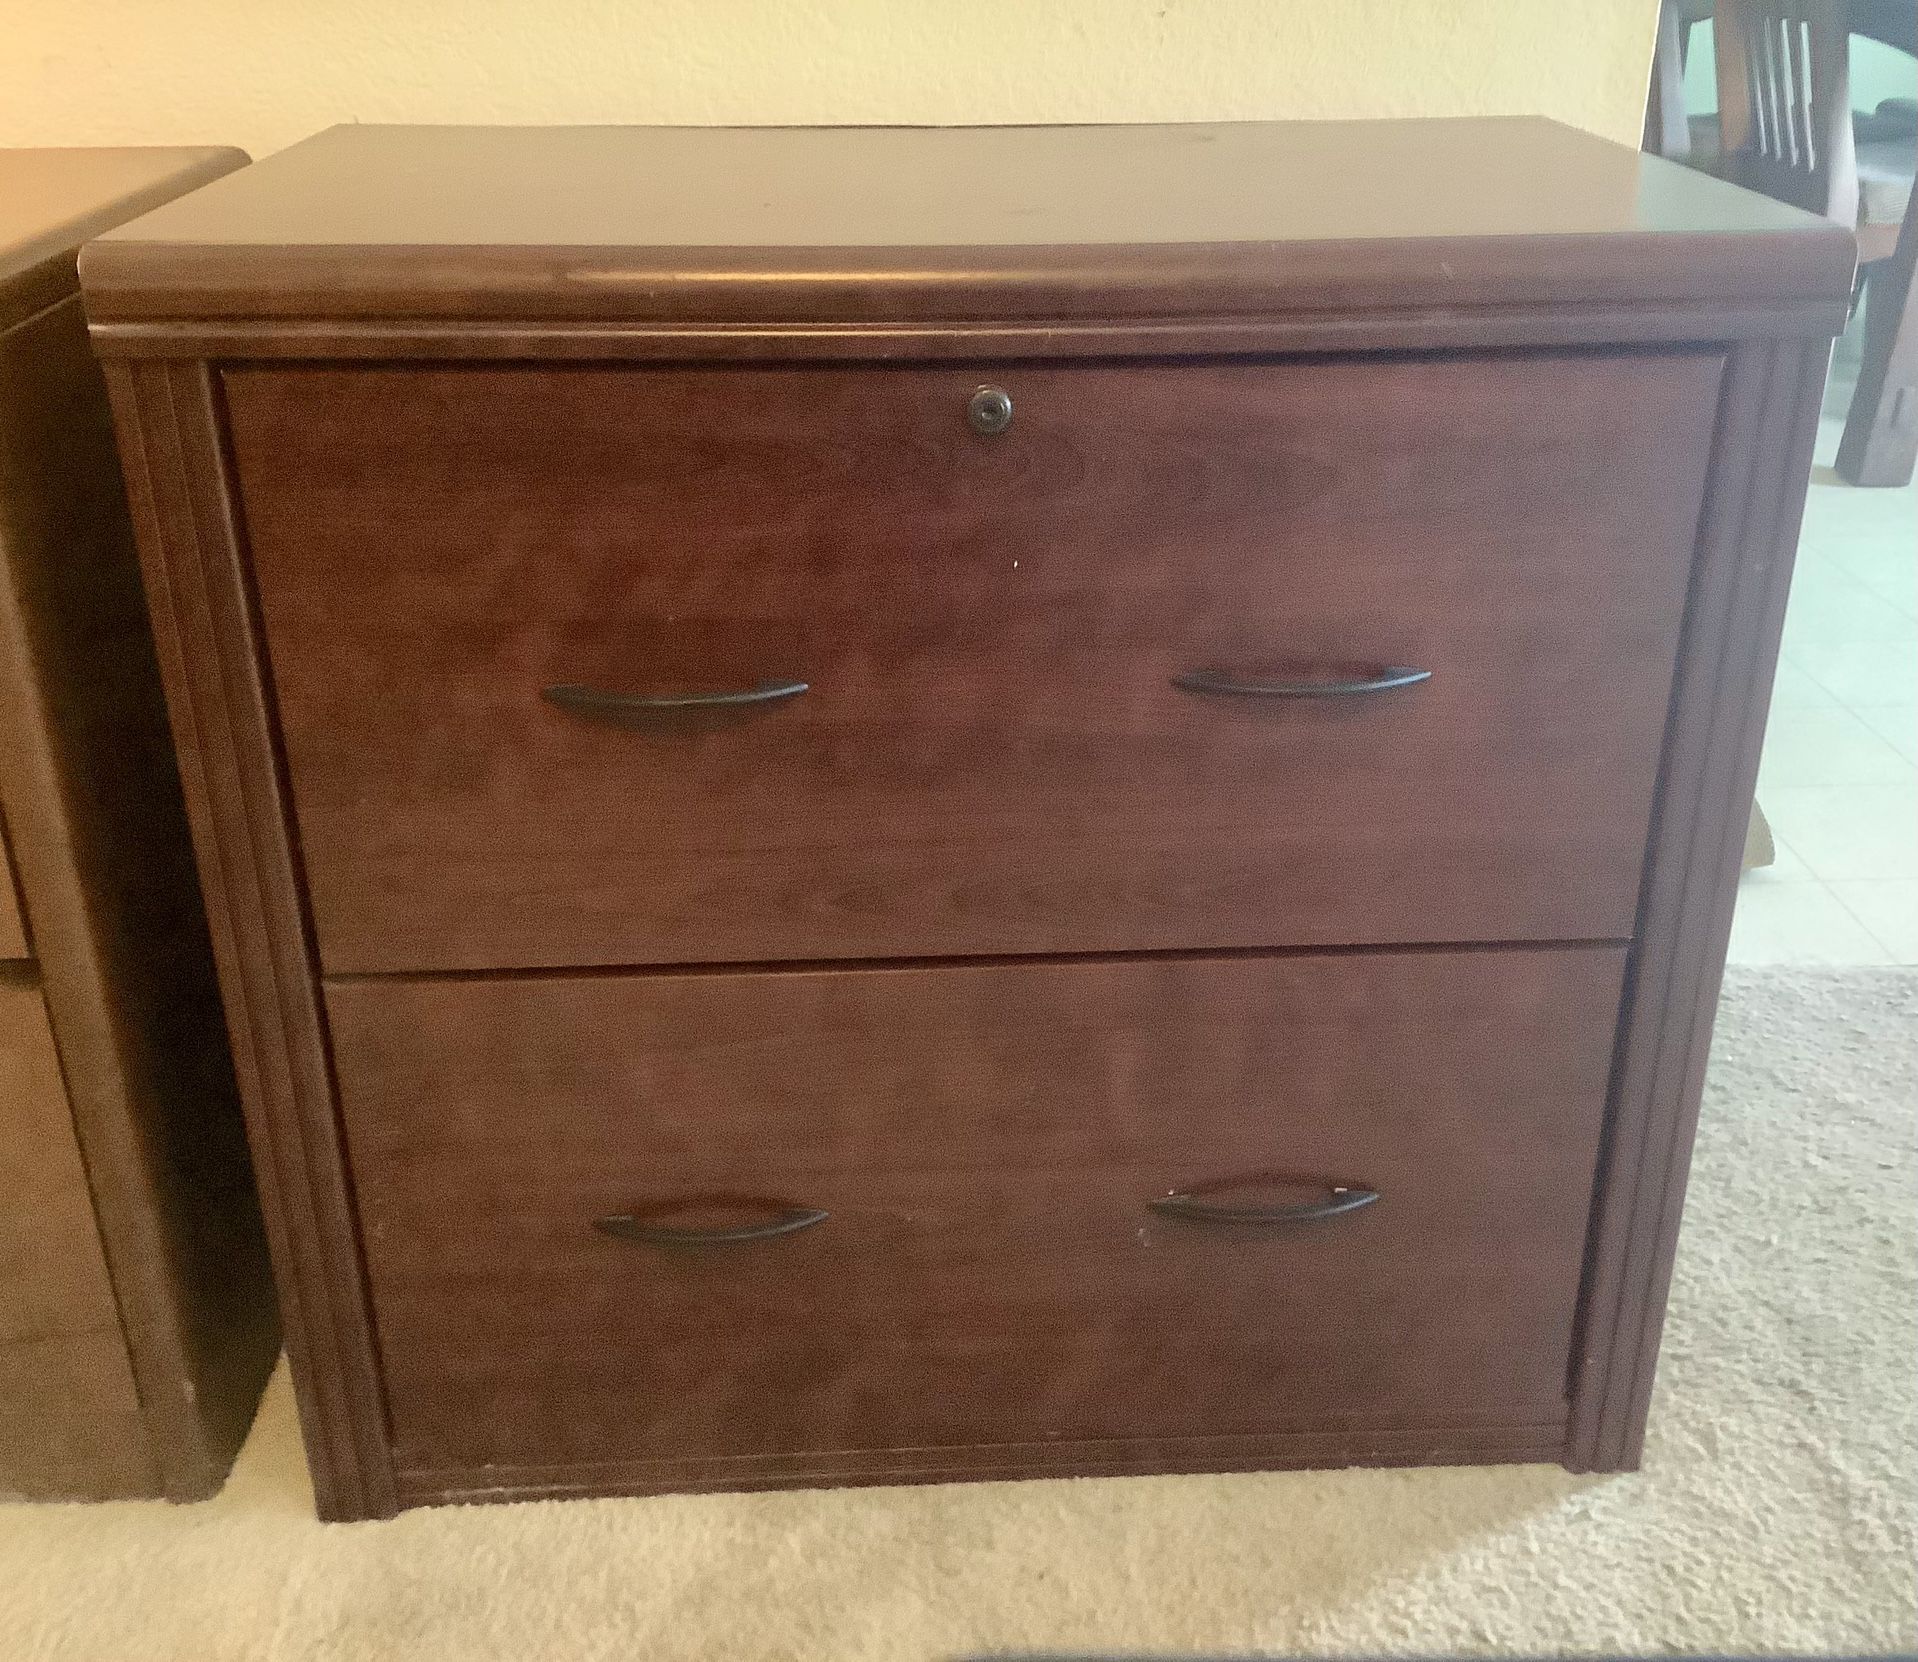 File Cabinet - MOVING. PRICED TO SELL ASAP